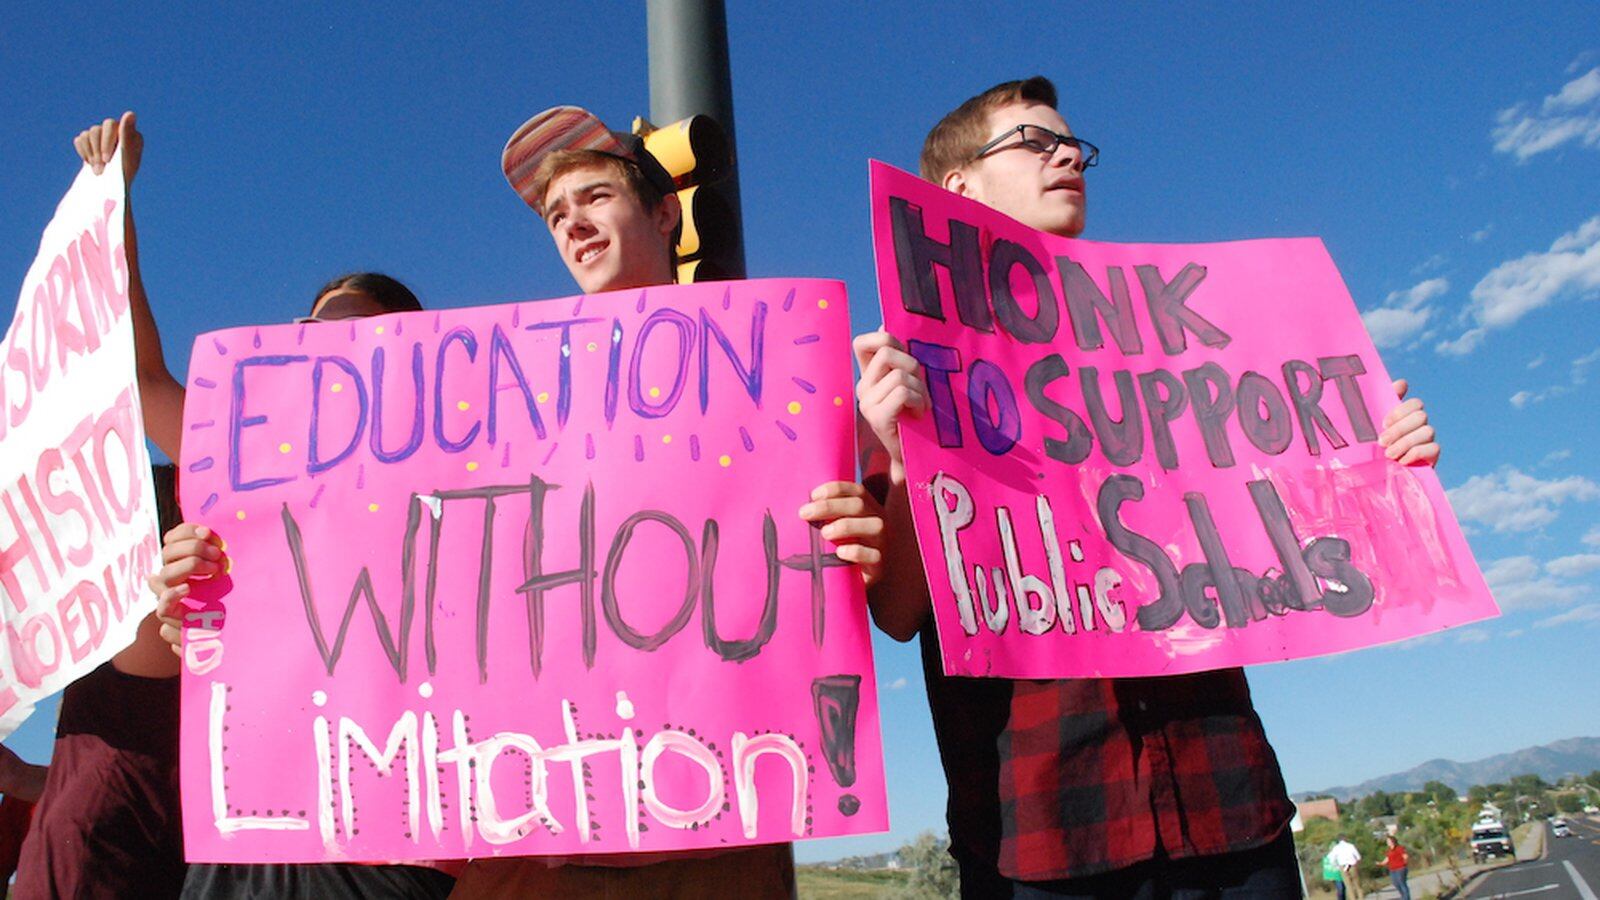 Jeffco Public Schools students took to the streets for a week in September to protest a proposed curriculum review committee they believed would censor some of their classes.